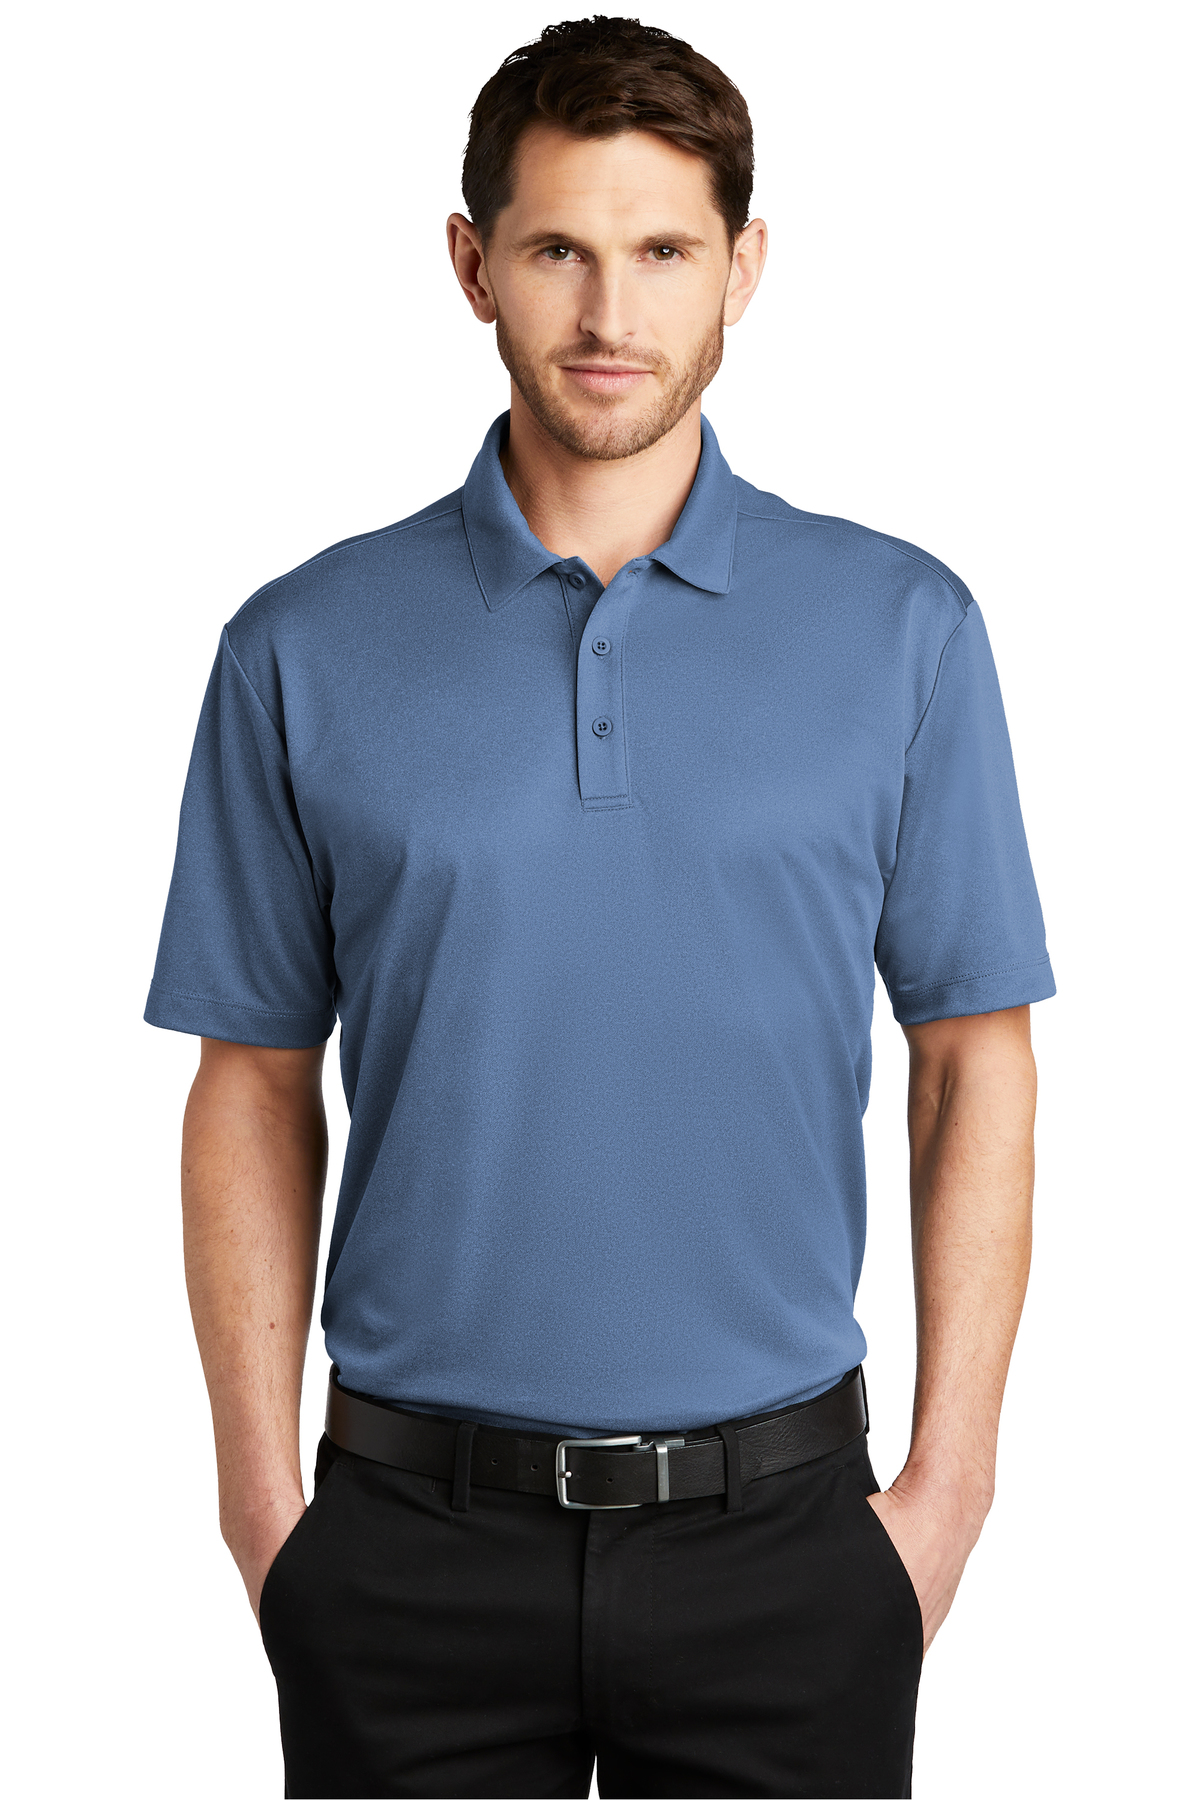 Port Authority Heathered Silk Touch Performance Polo | Product | SanMar